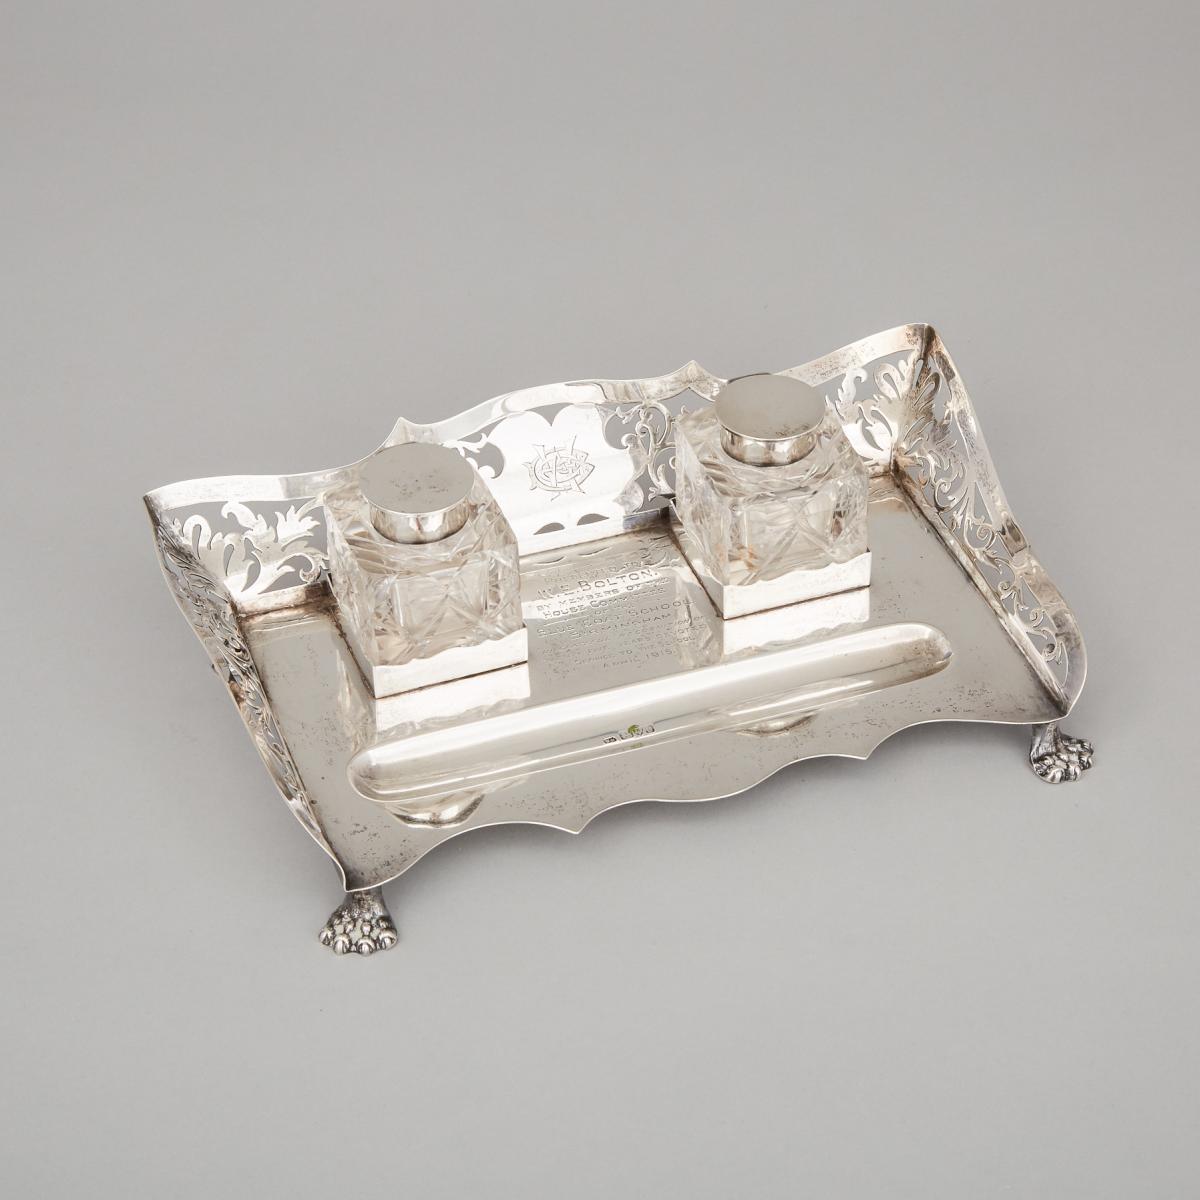 Edwardian Silver Inkstand, William Neale, Chester, 1905, length 10.5 in — 26.7 cm